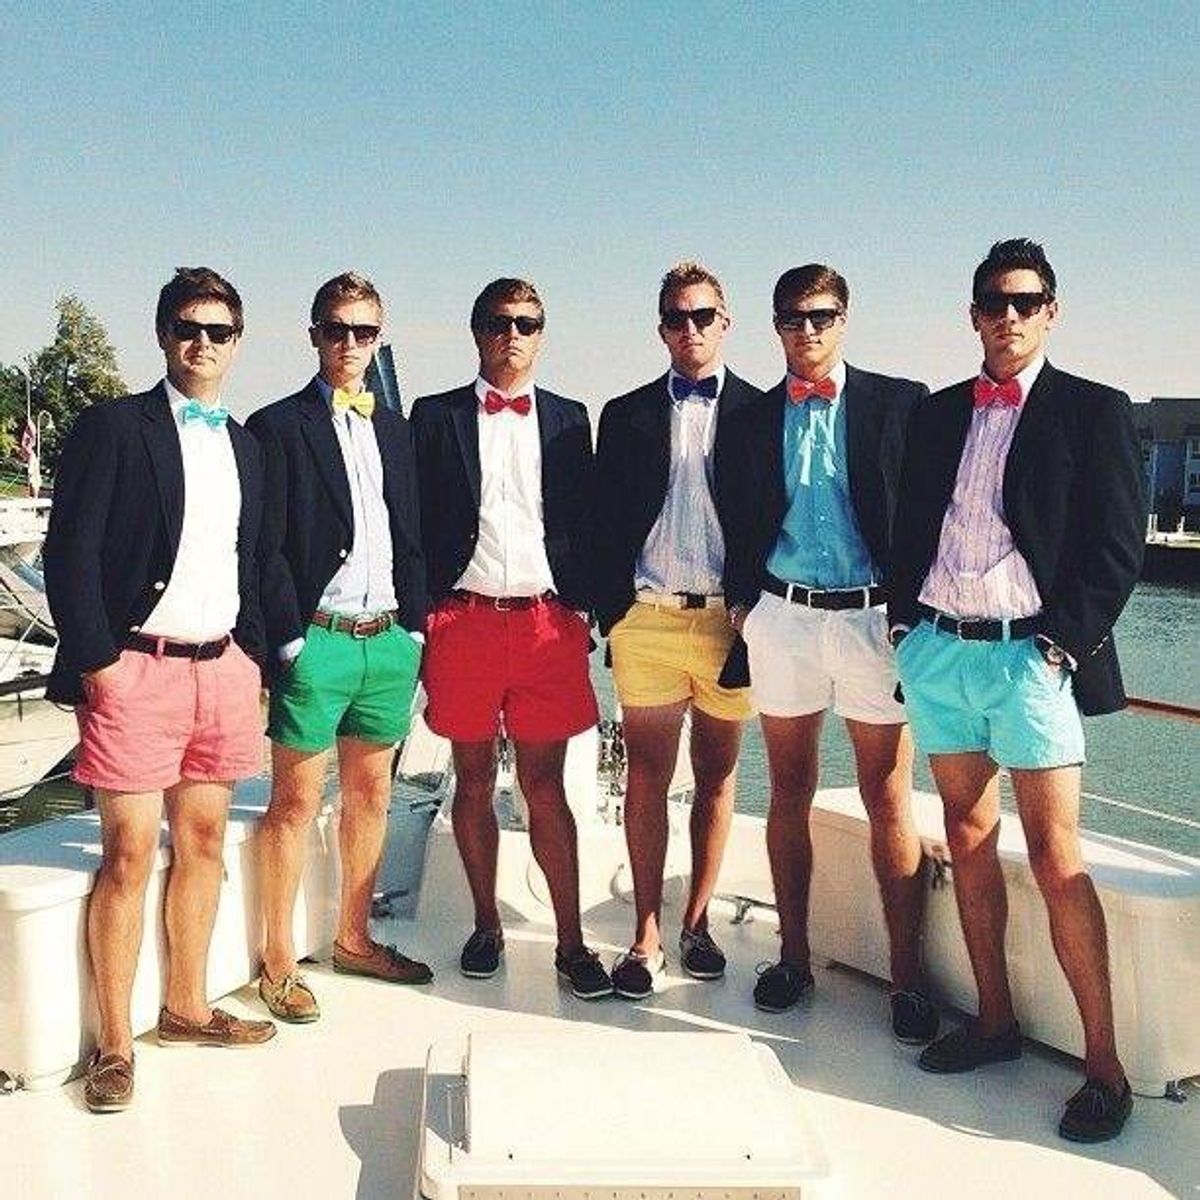 10 Signs You Should Have Joined A Frat Instead Of Sorority